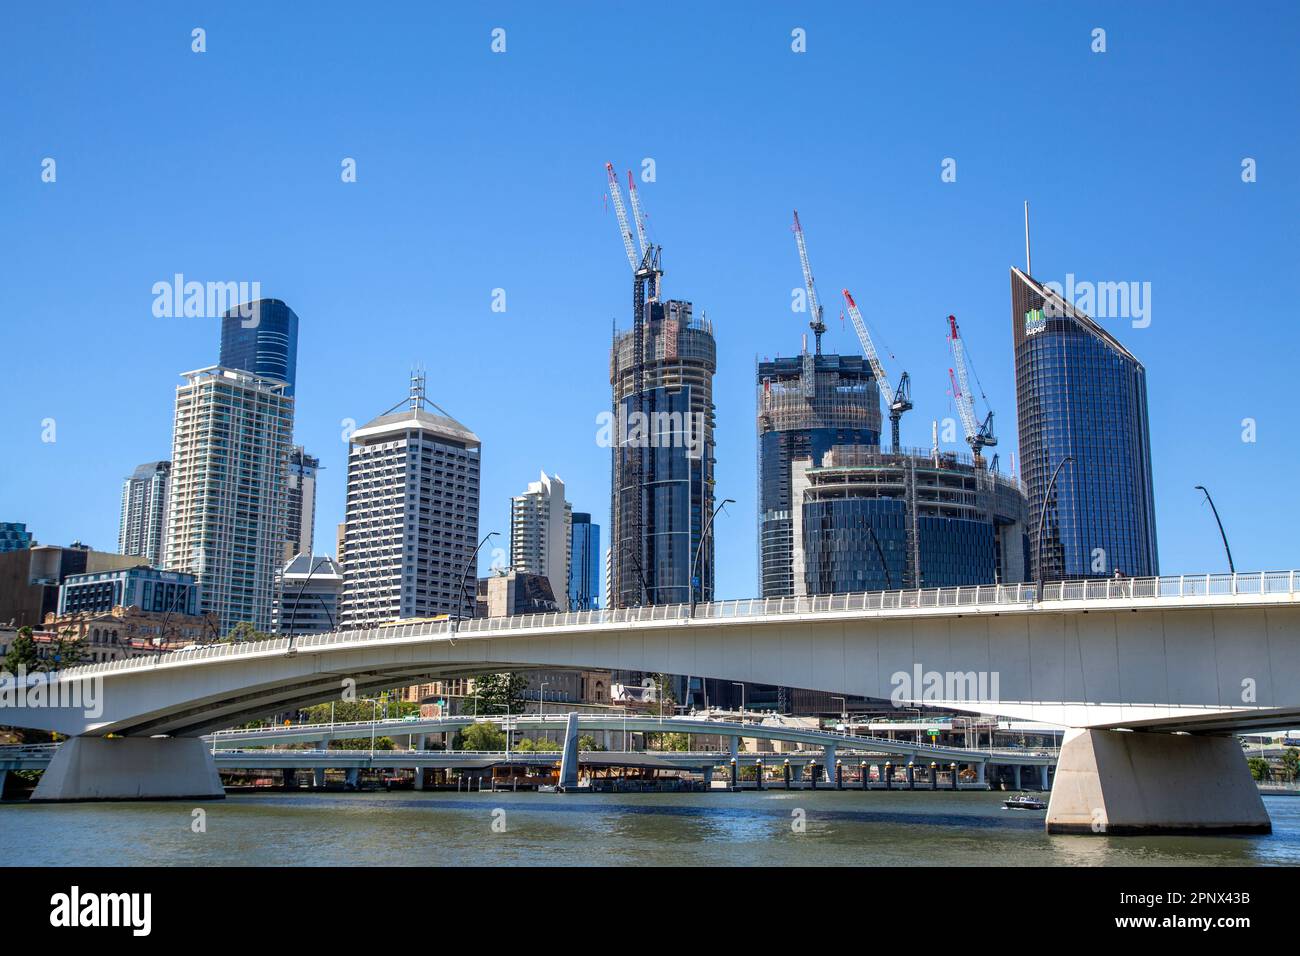 The Victoria Bridge is a bridge for buses, pedestrians and cyclists over the Brisbane River opened in April 1969. Stock Photo